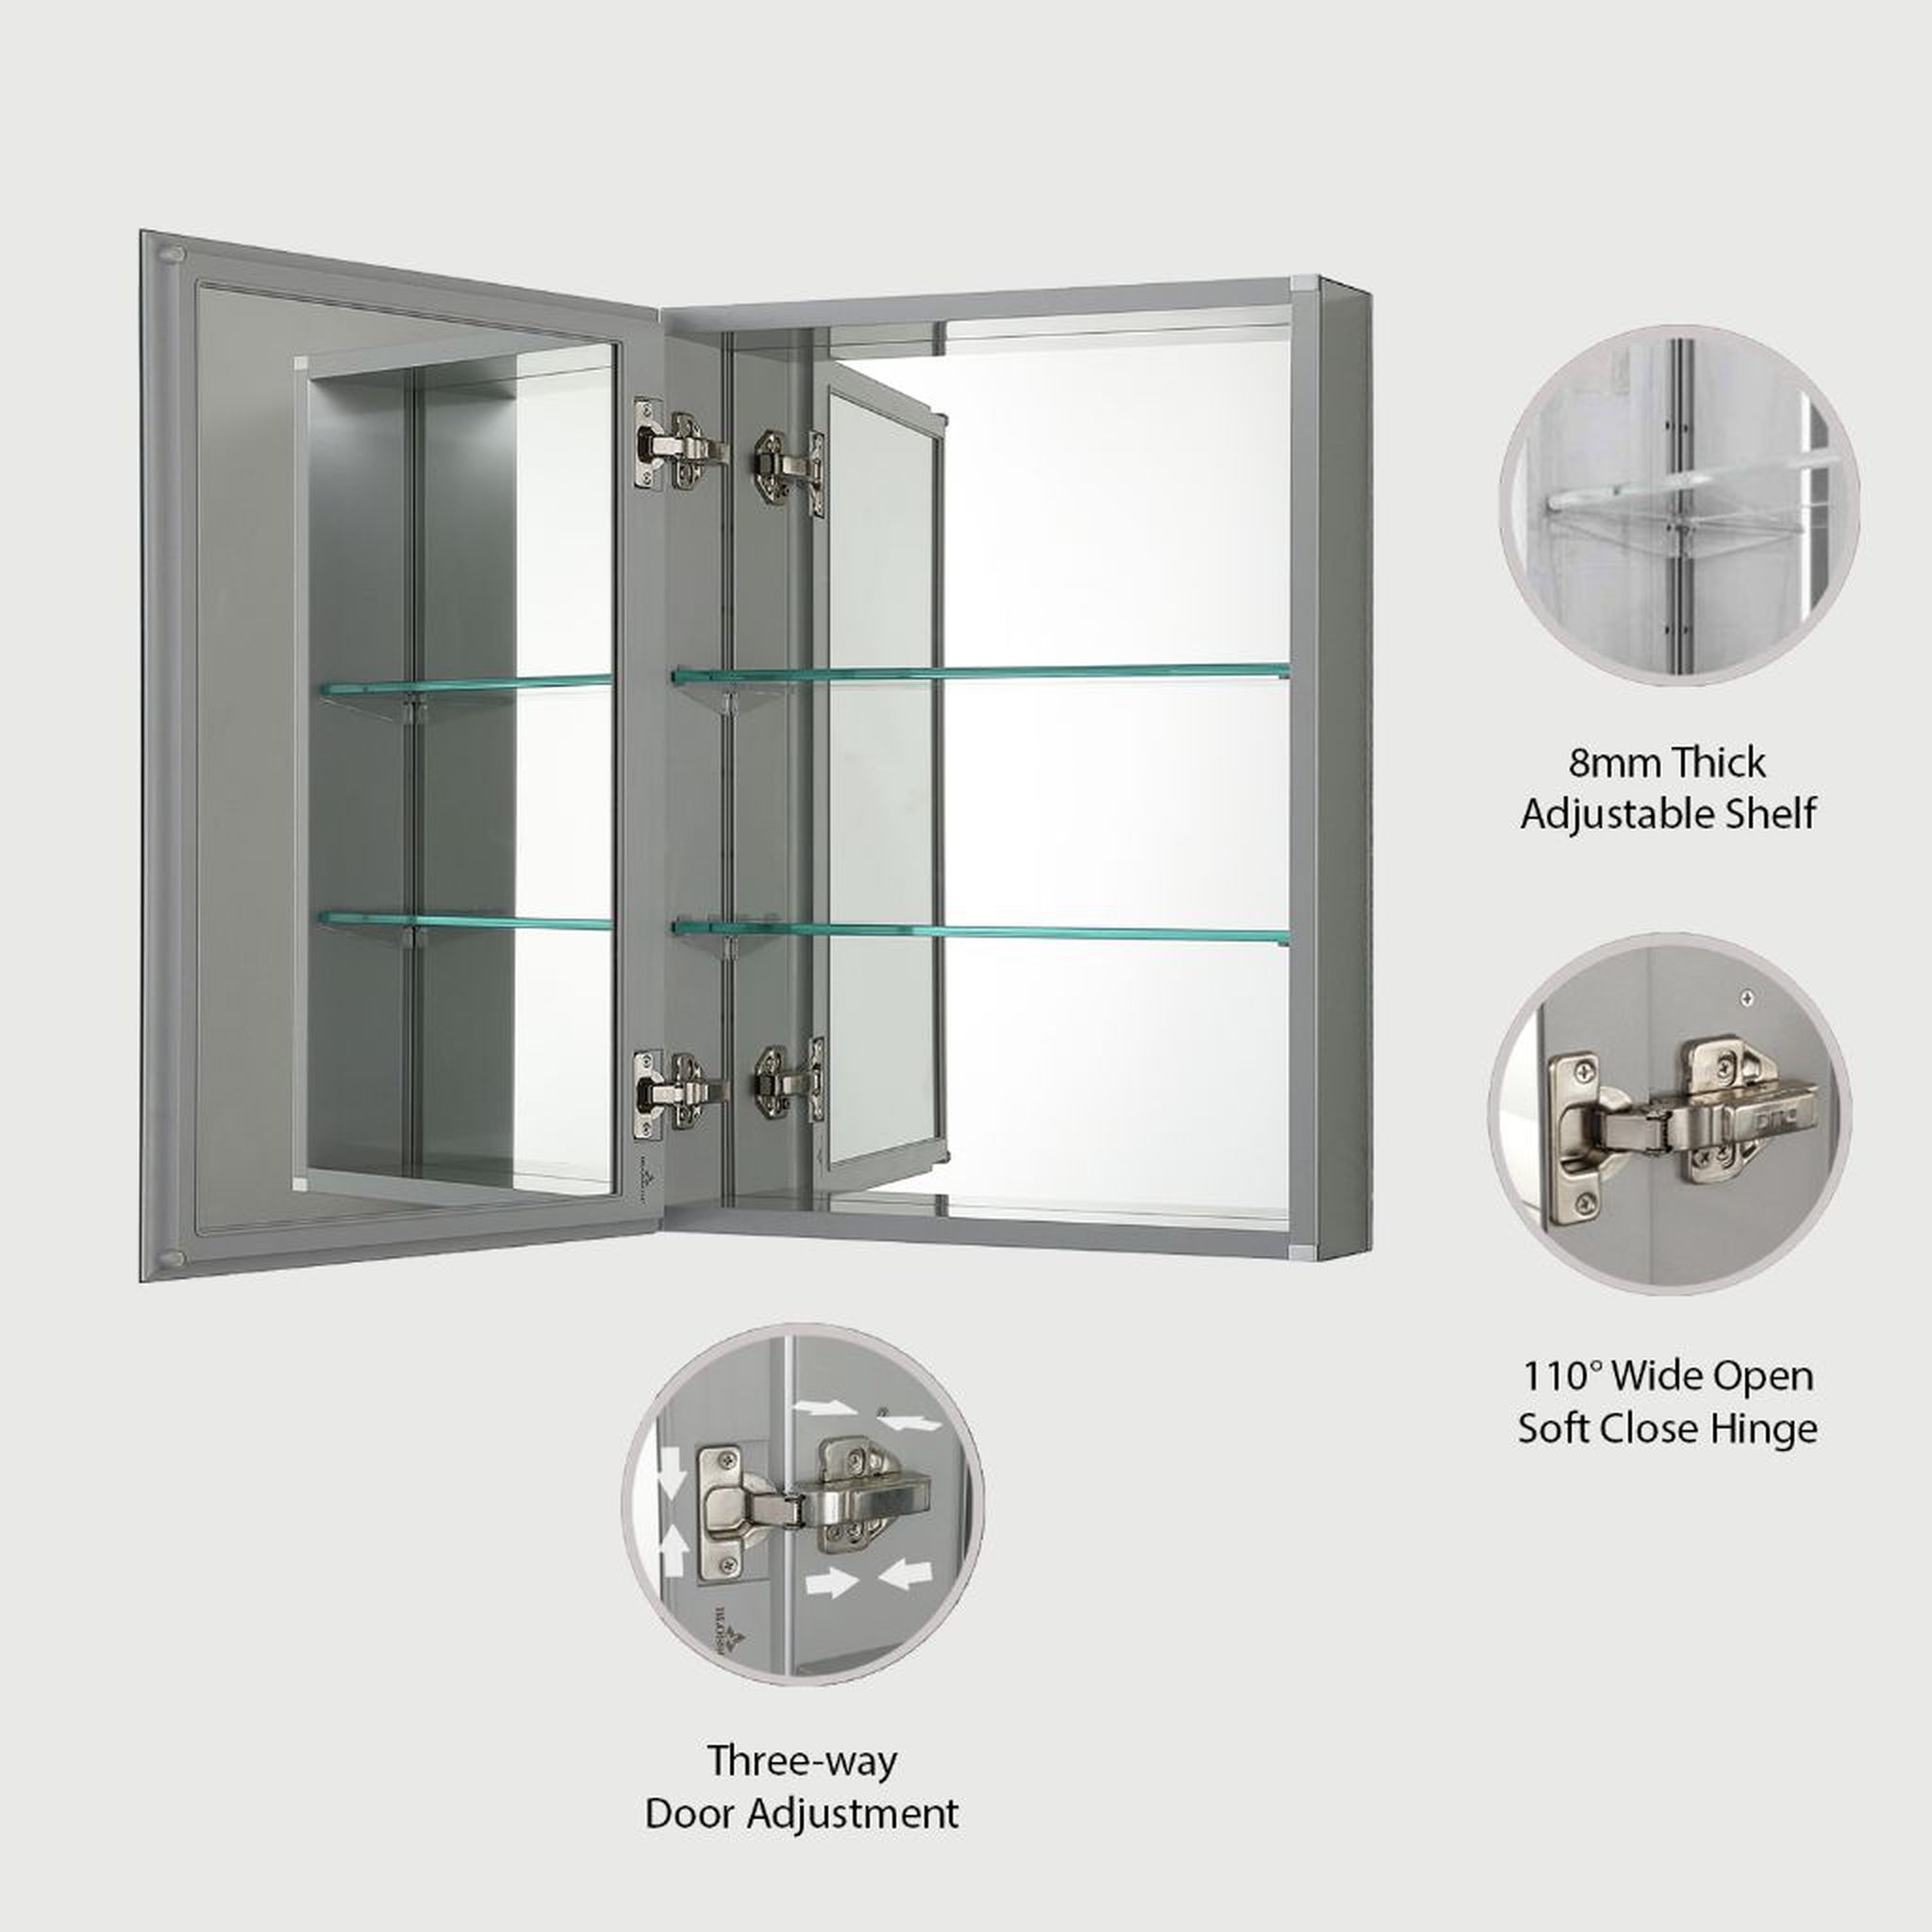 https://cdn.shopify.com/s/files/1/0555/9527/0317/products/Blossom-Mc8-16-x-20-Recessed-Or-Surface-Mount-Left-Or-Right-Hand-Swing-Door-Aluminum-Medicine-Cabinet-With-Mirror-Adjustable-Hinges-And-Adjustable-Glass-Shelves-2.jpg?v=1675207933